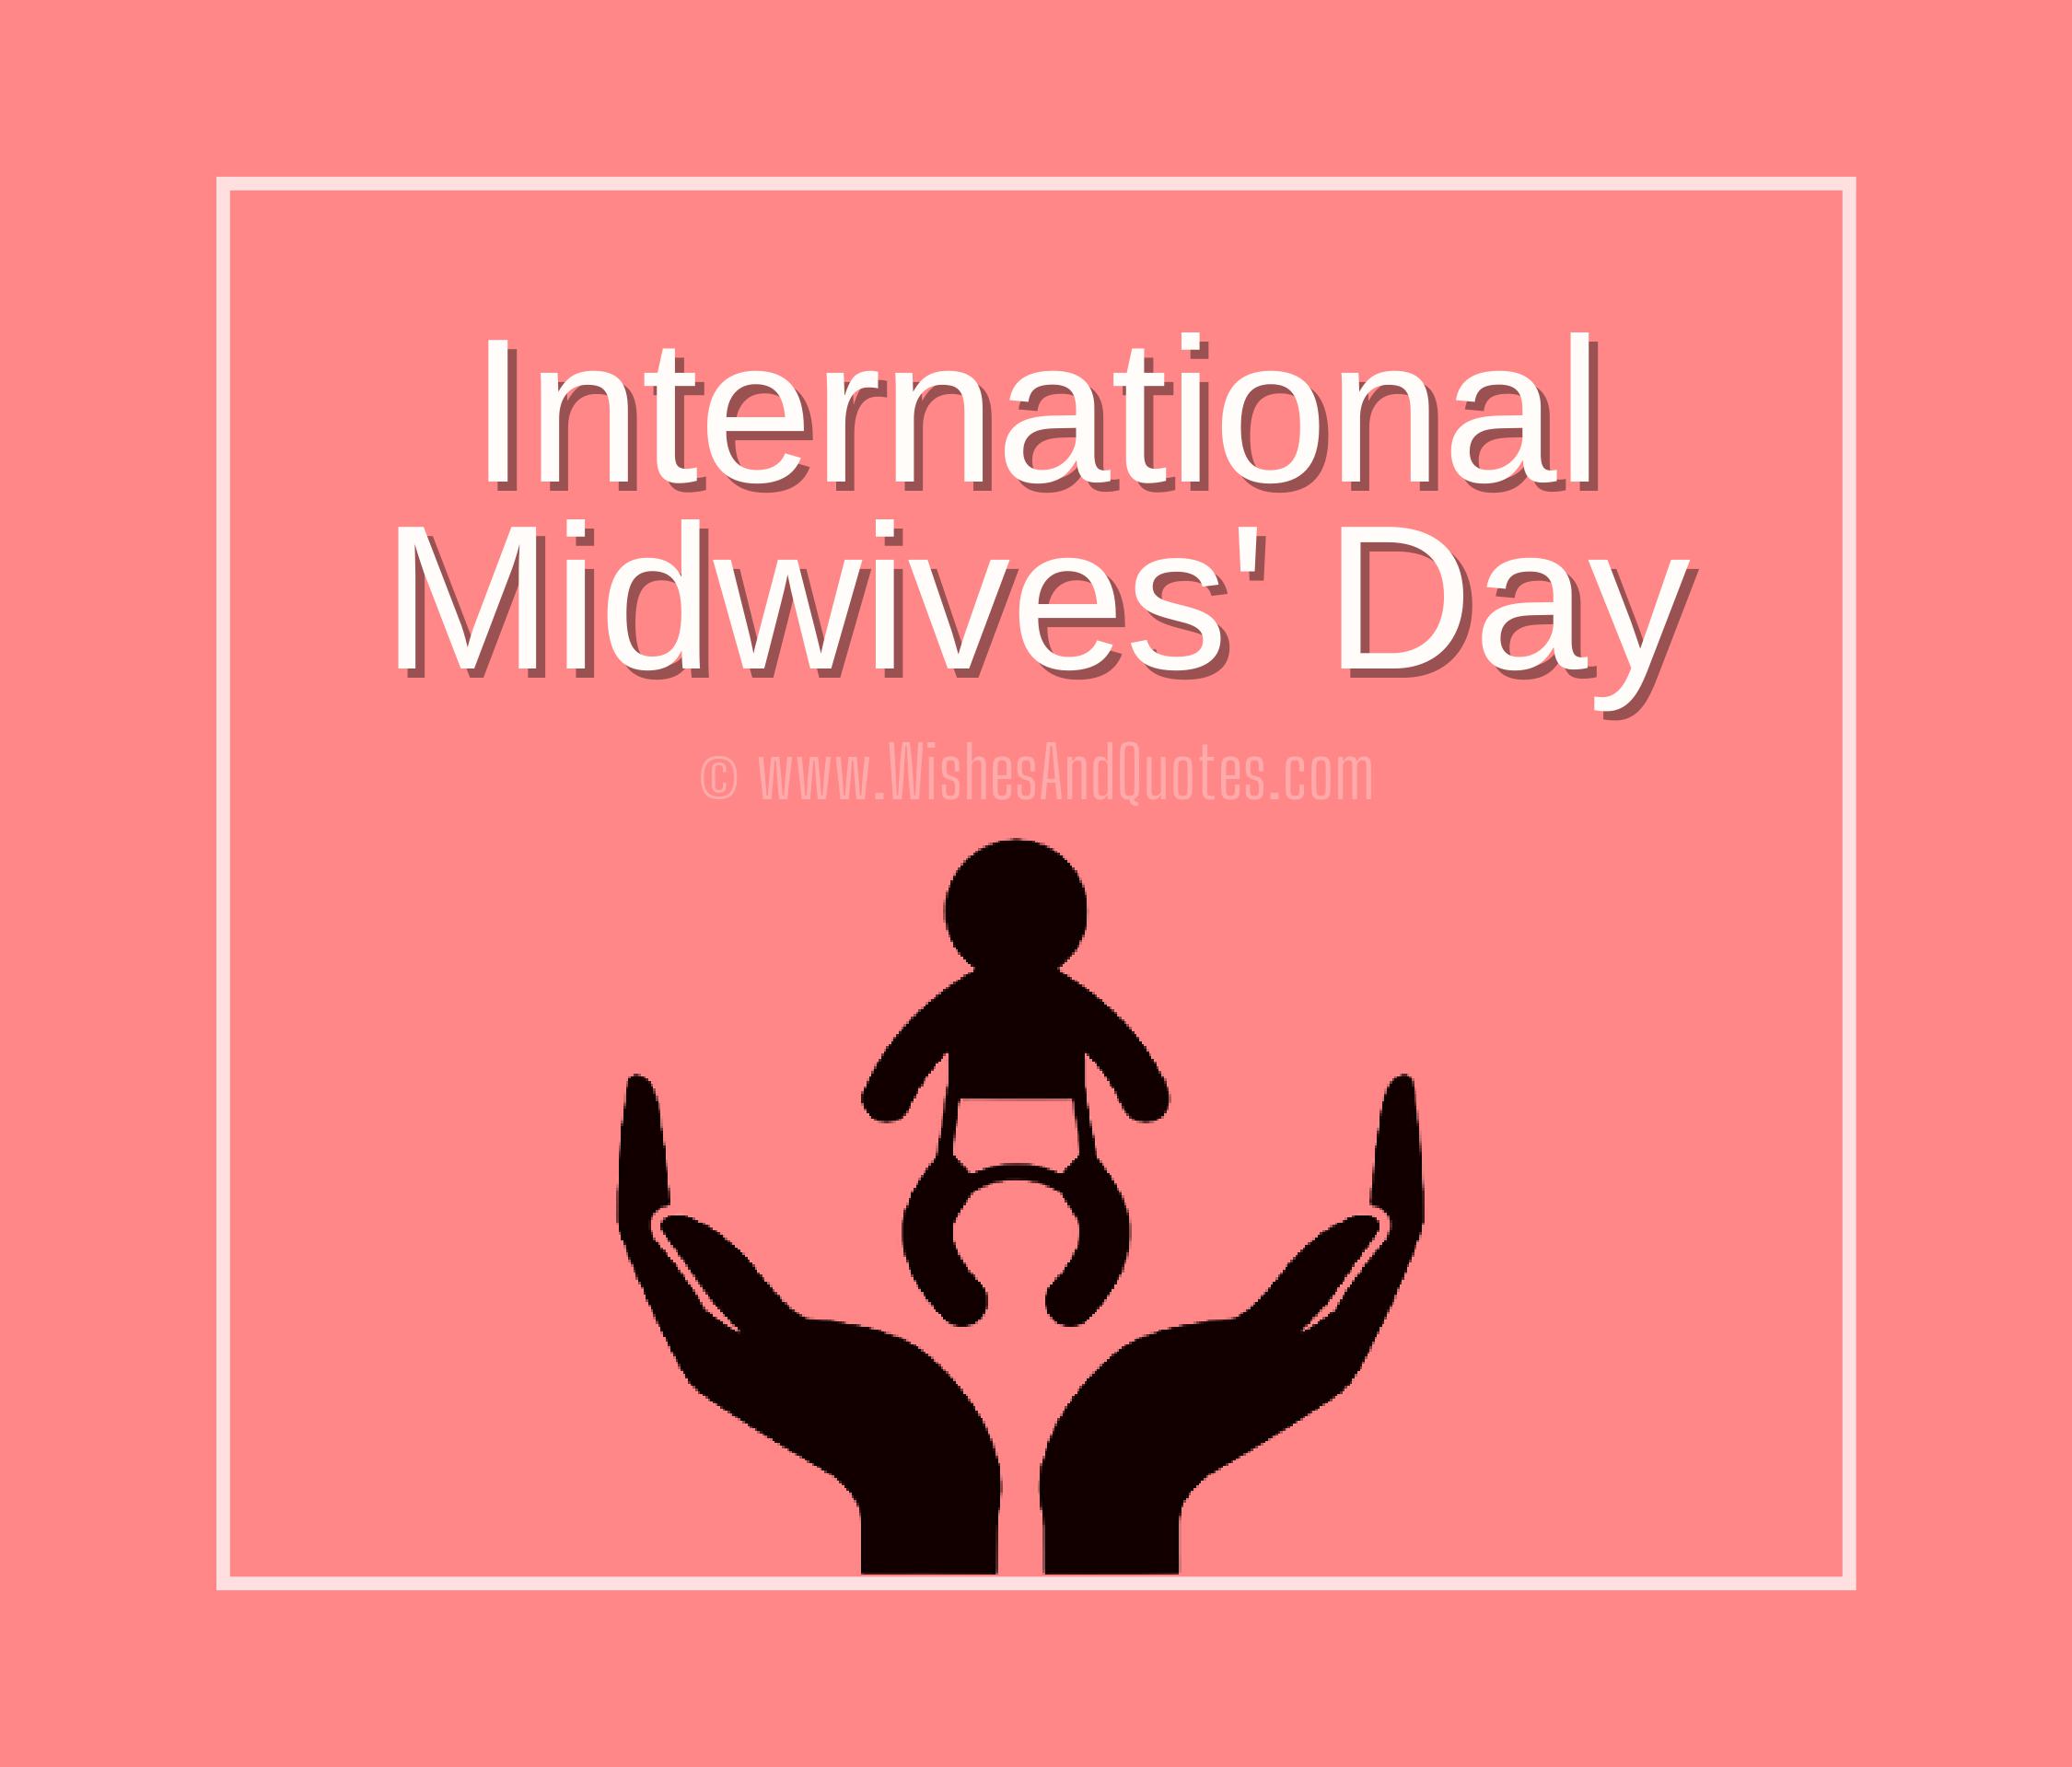 International Midwives' Day